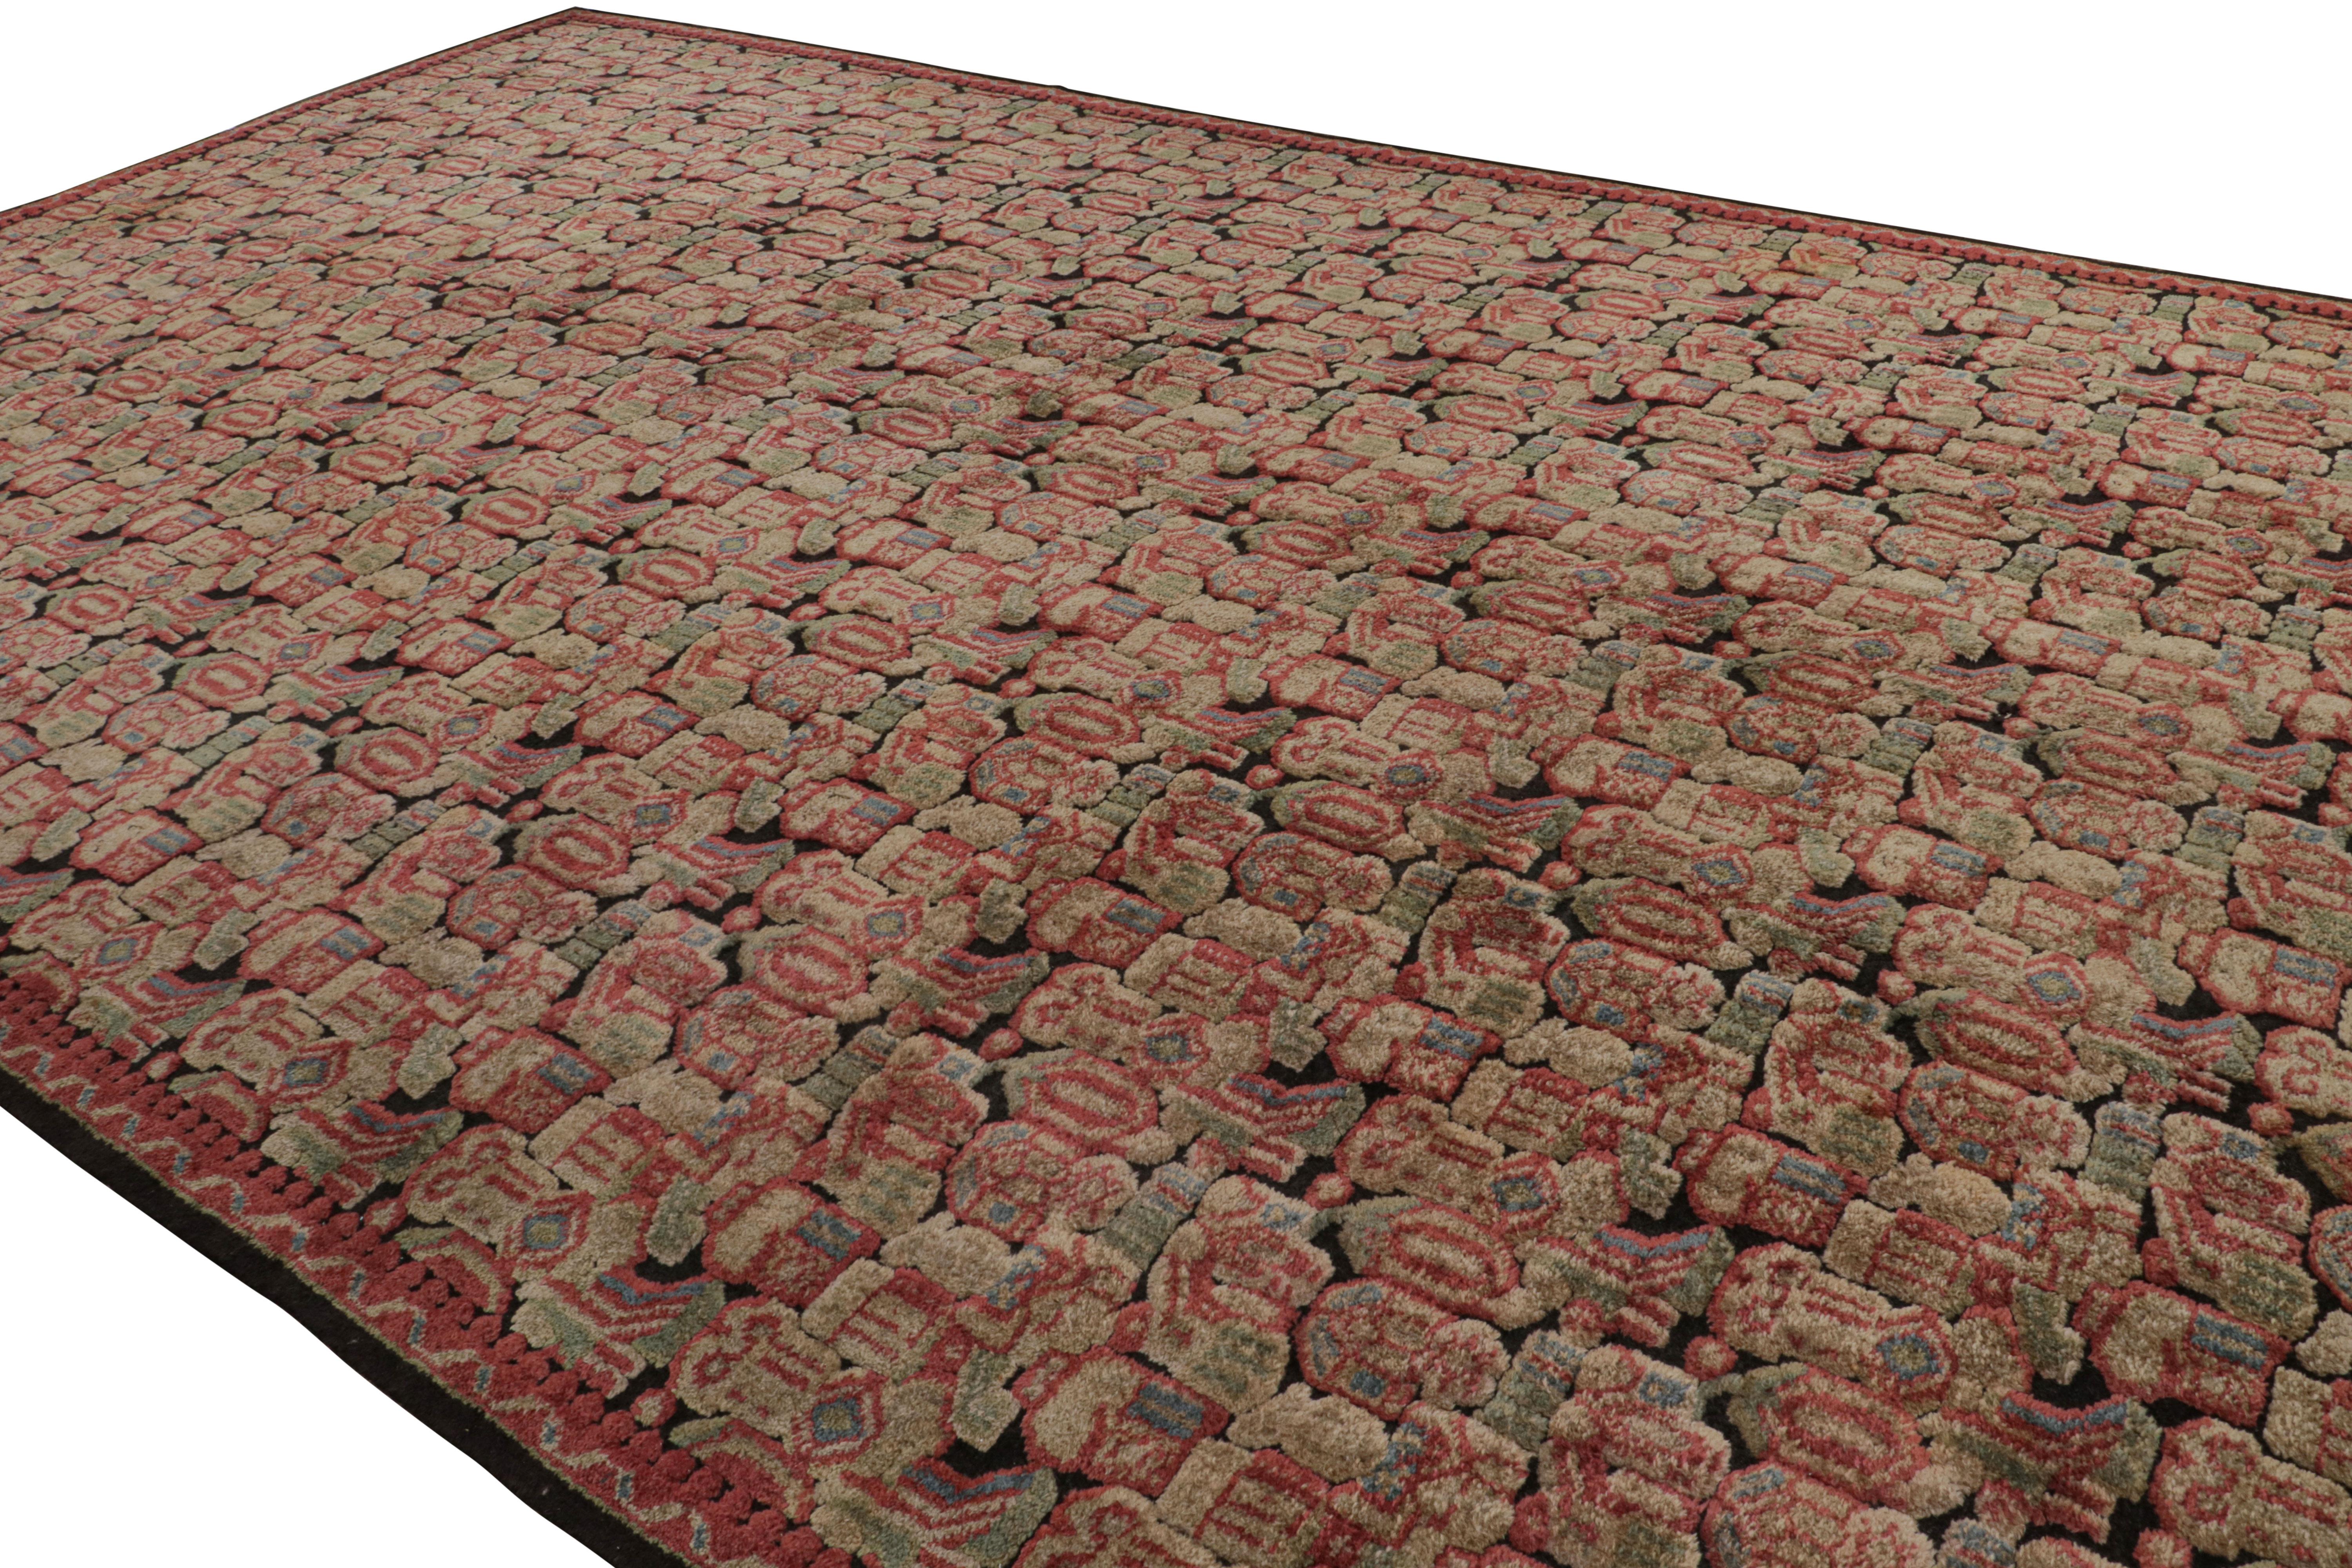 Hand-knotted in wool, an antique 12x20 oversized Axminster rug originating from England circa 1920-1930 - now joining our antique collection.

On the Design:

The piece enjoys beige-brown, red and green tones underscoring a geometric pattern married